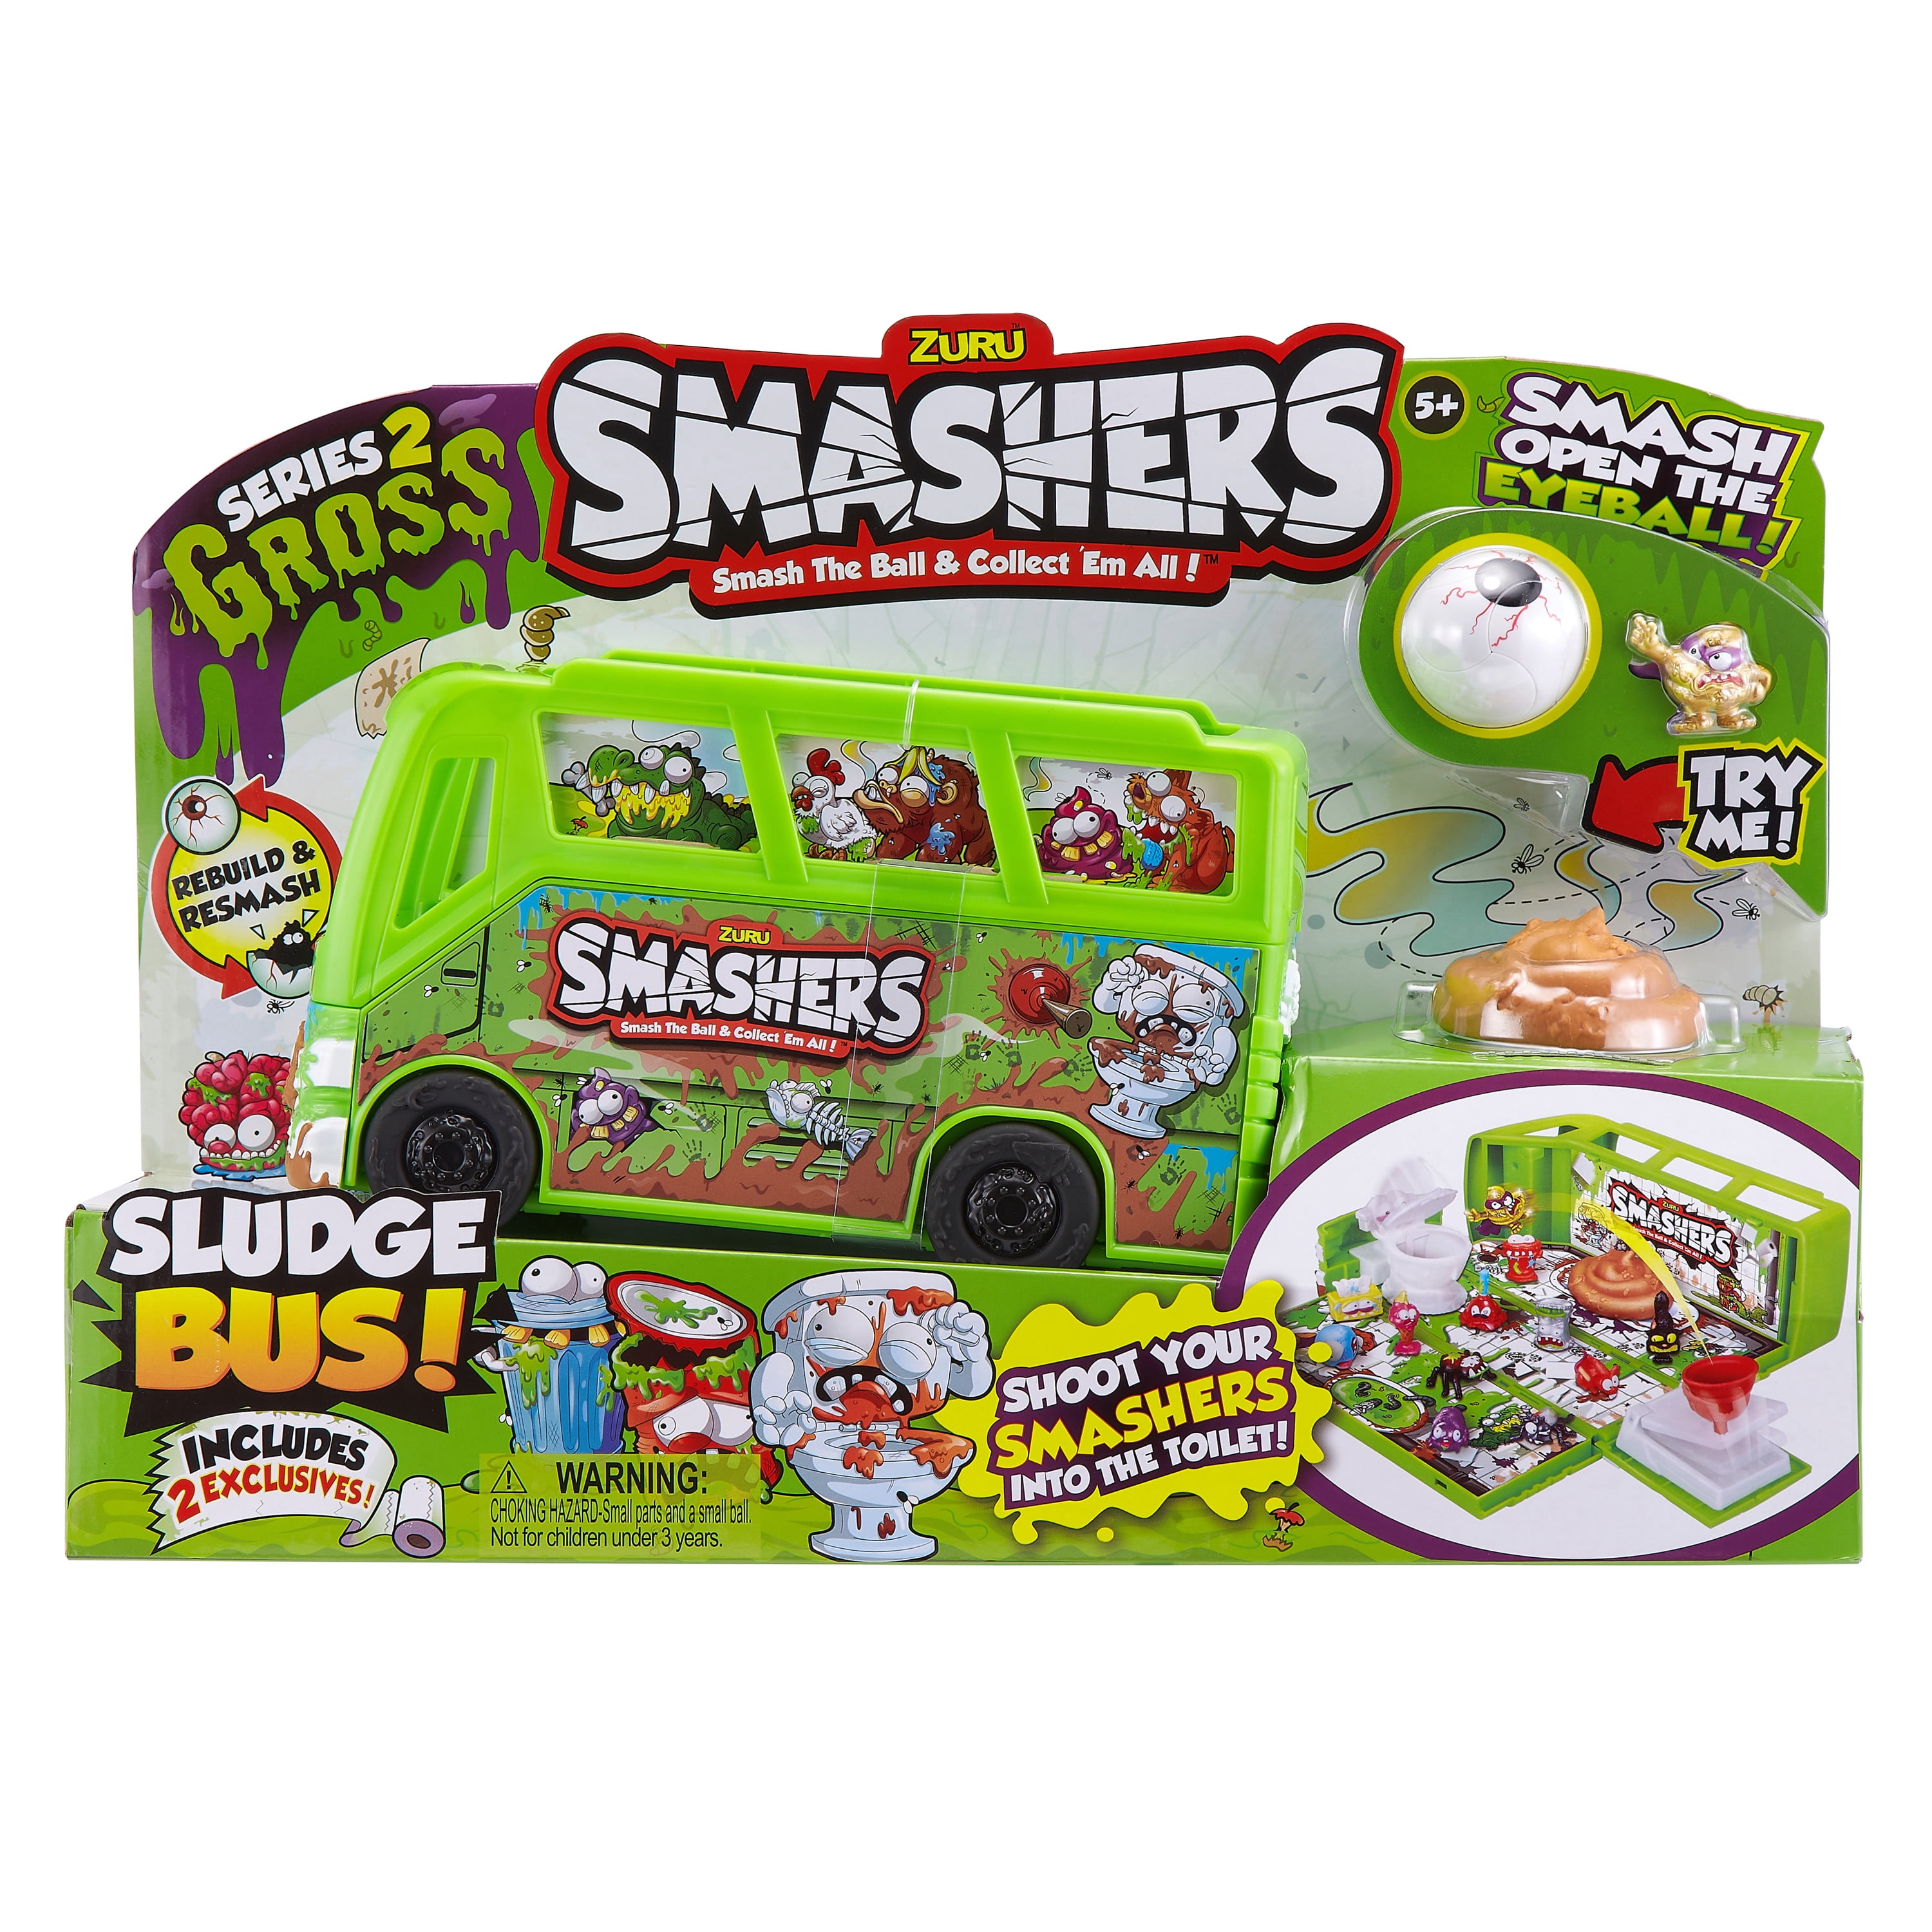 Smashers Zuru Smash Ball Gross Theme Collectibles Toy 8 pack